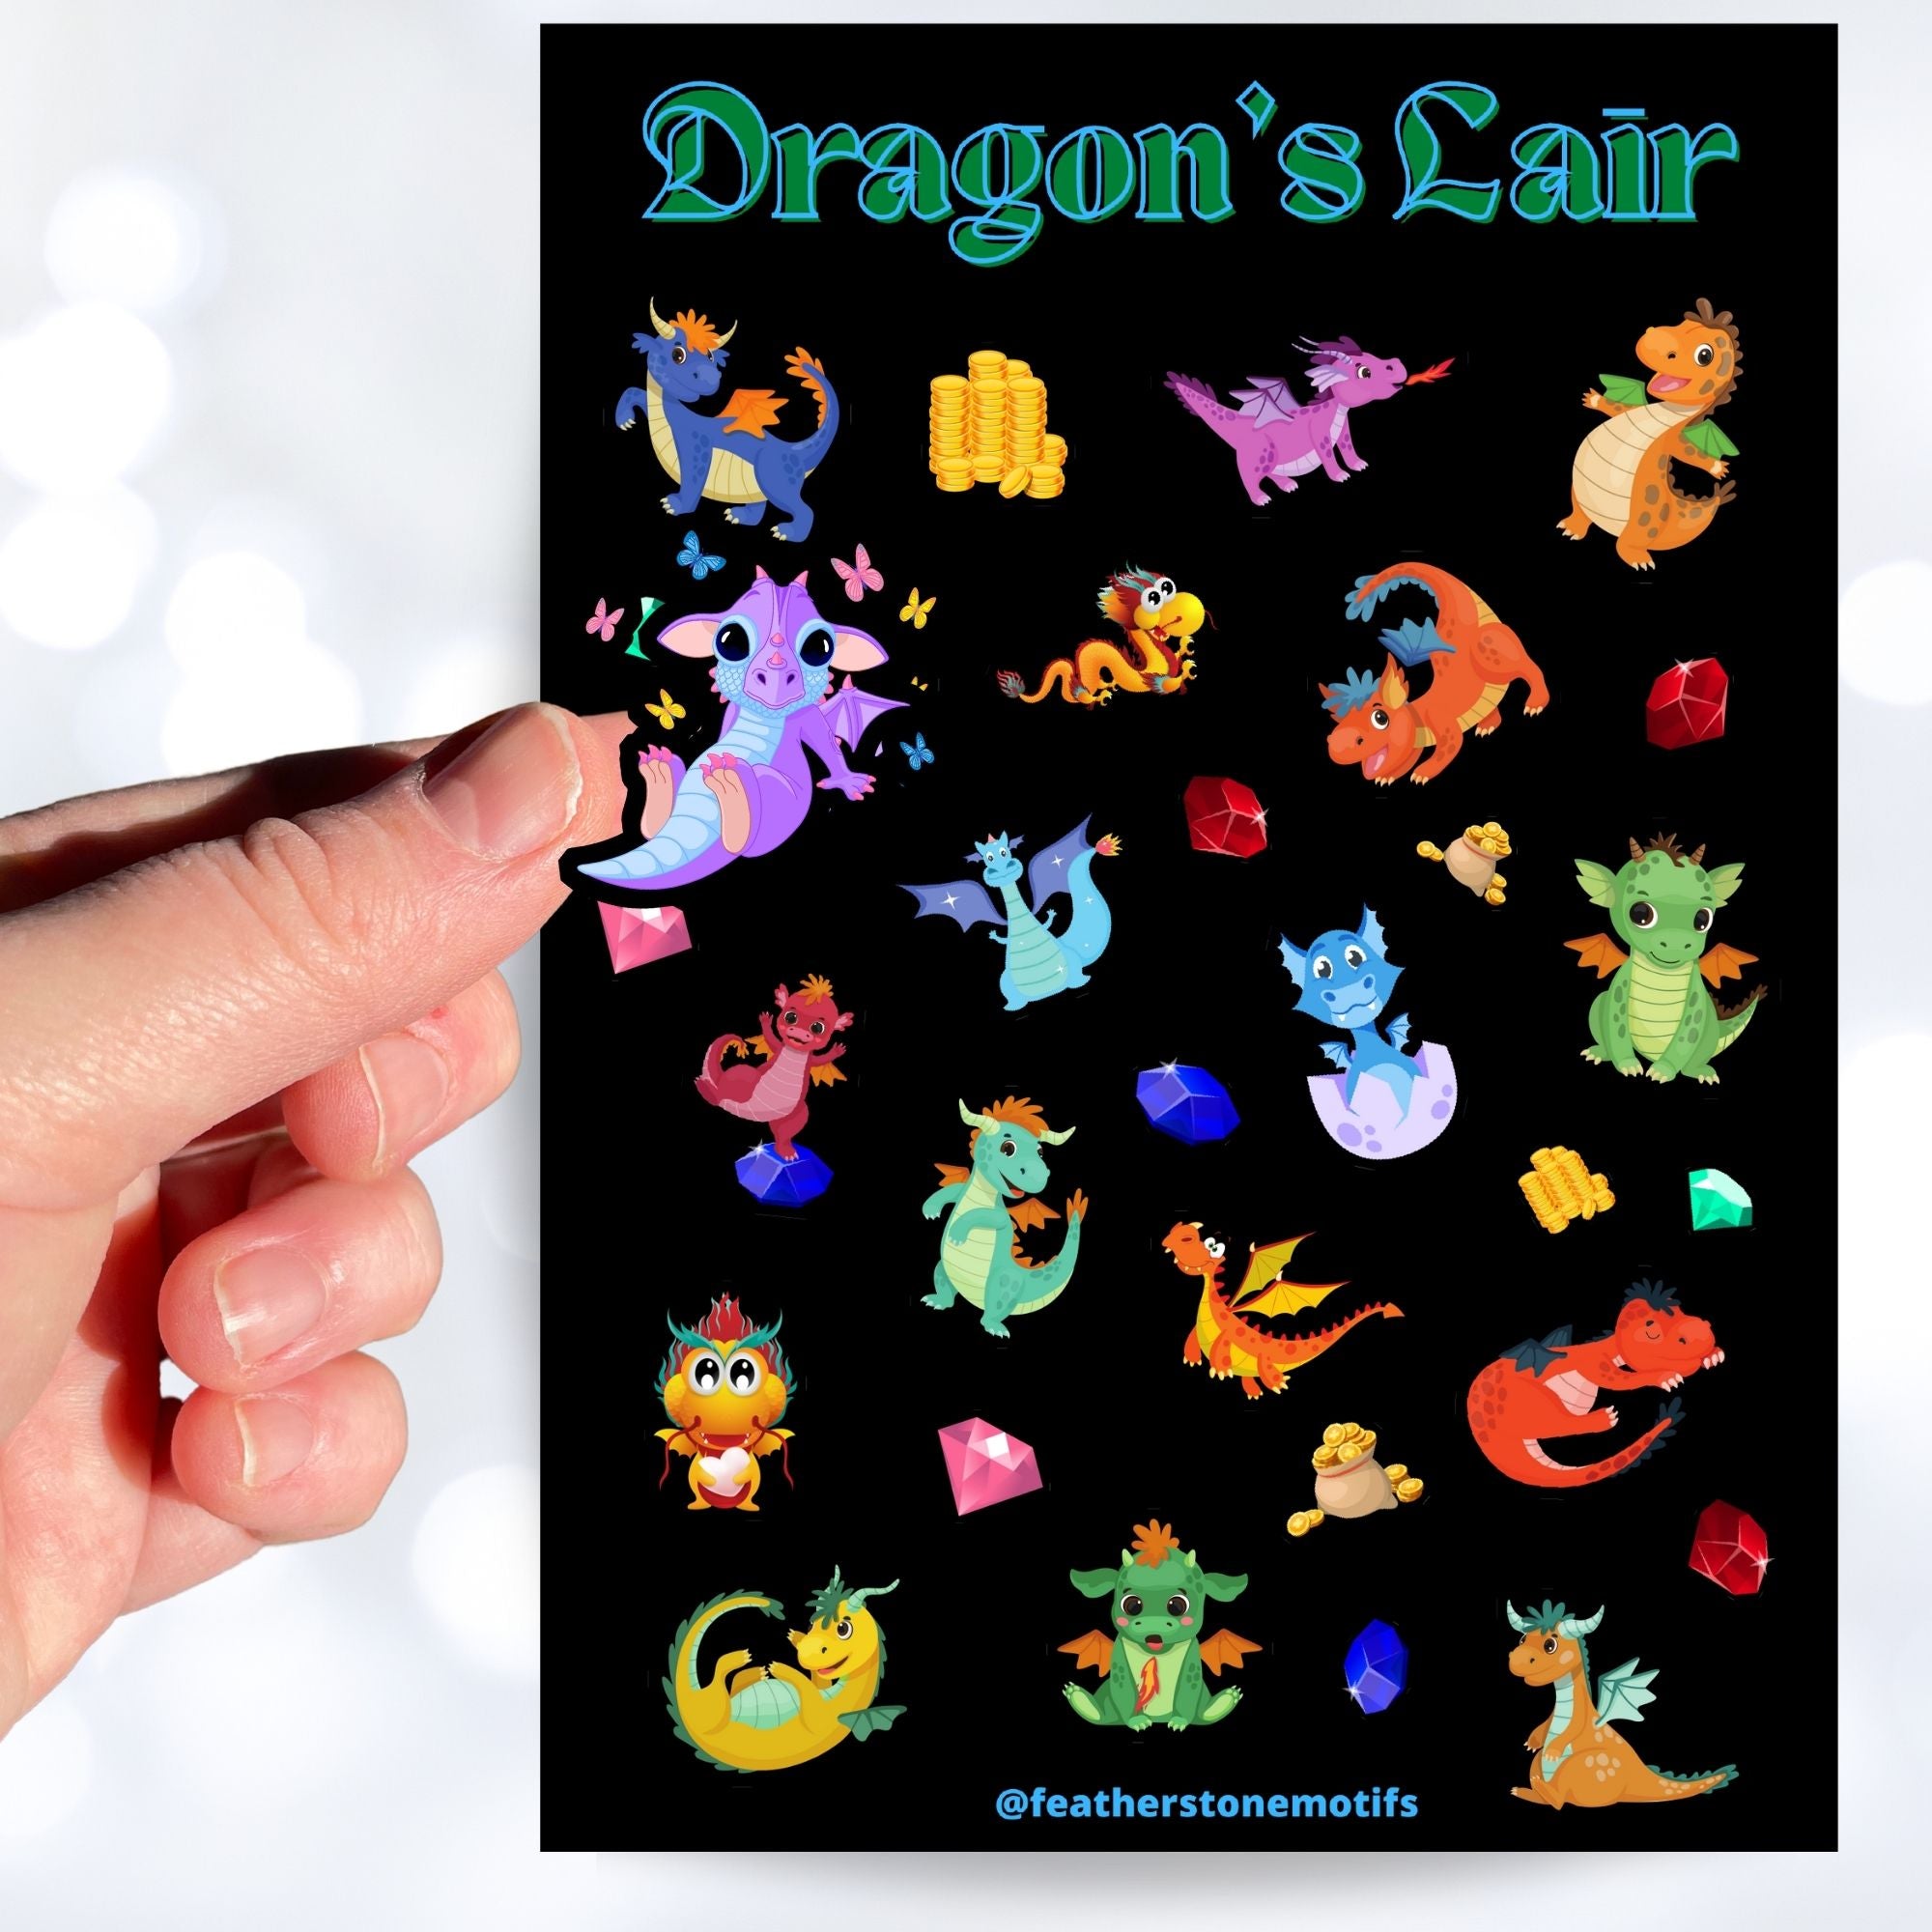 This sticker sheet is filled with cute images of baby dragons, and of course their treasure! This image shows a hand holding a sticker of a purple dragon sitting with butterflies flying around over the sticker sheet.